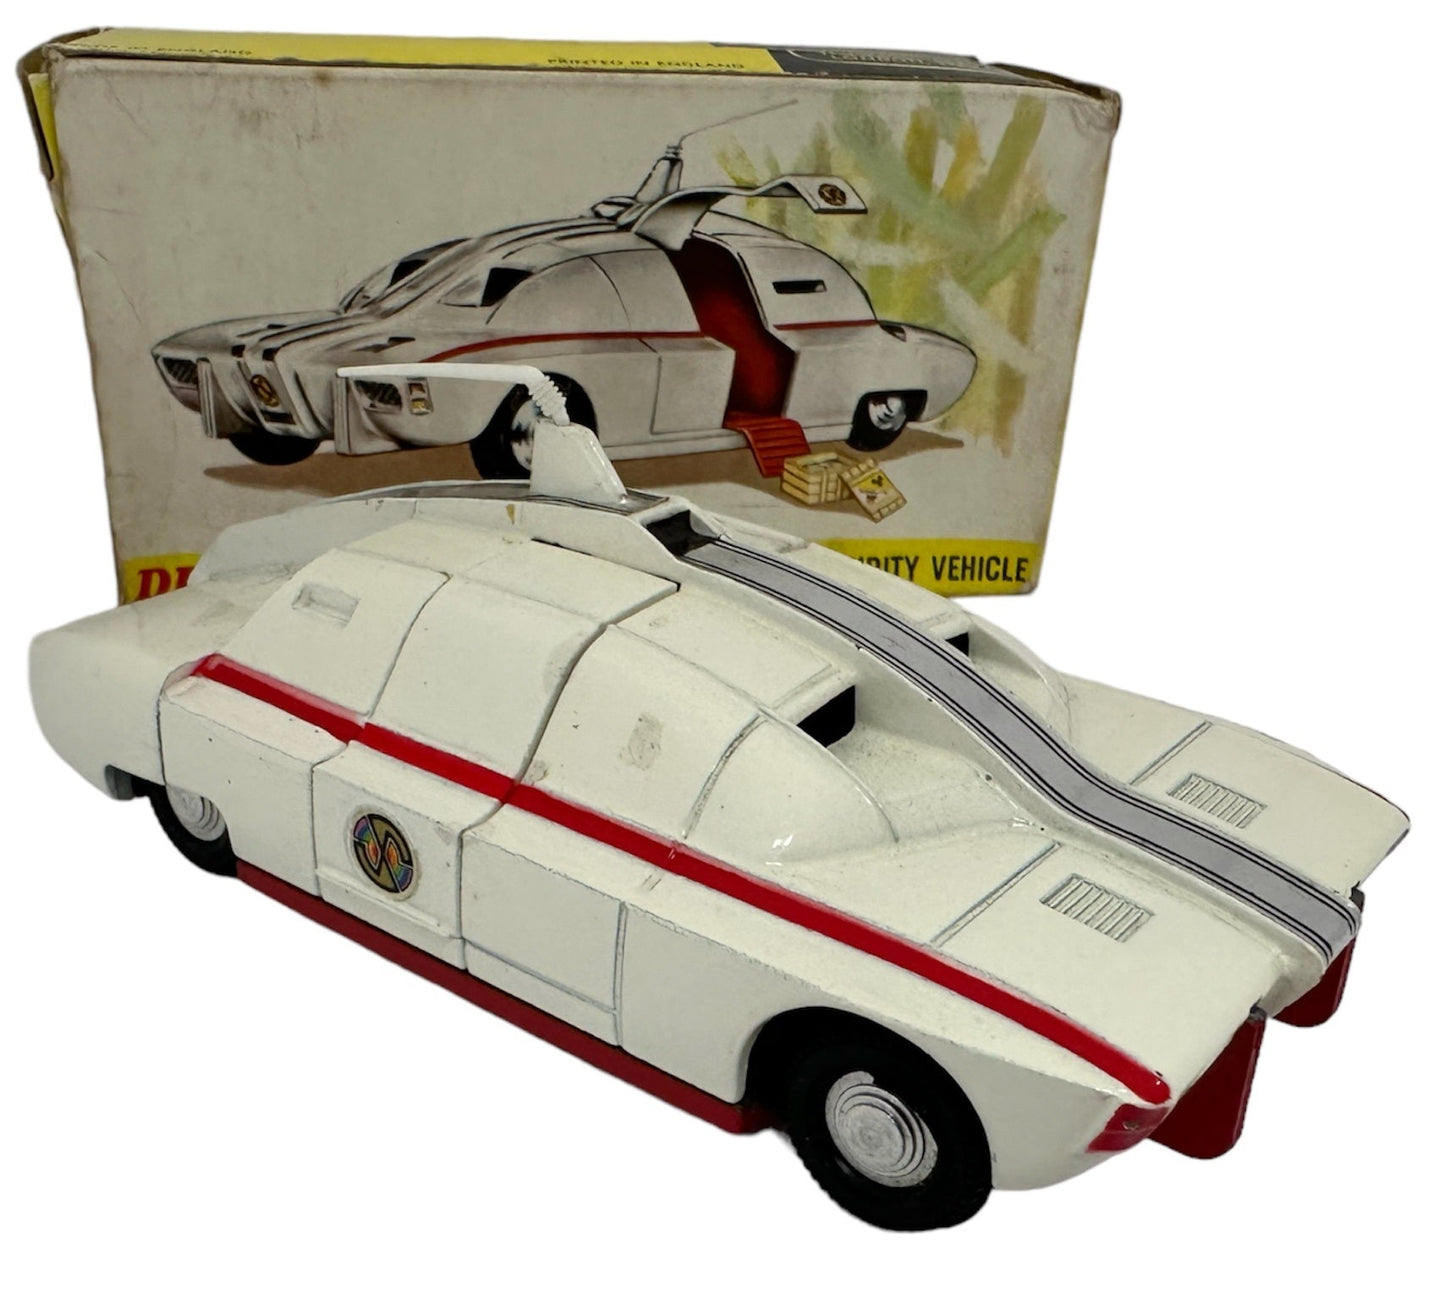 Vintage Dinky 1971 Gerry Andersons Captain Scarlet And The Mysterons MSV Maximum Security Vehicle Diecast 105 - Fantastic Condition In The Original Box